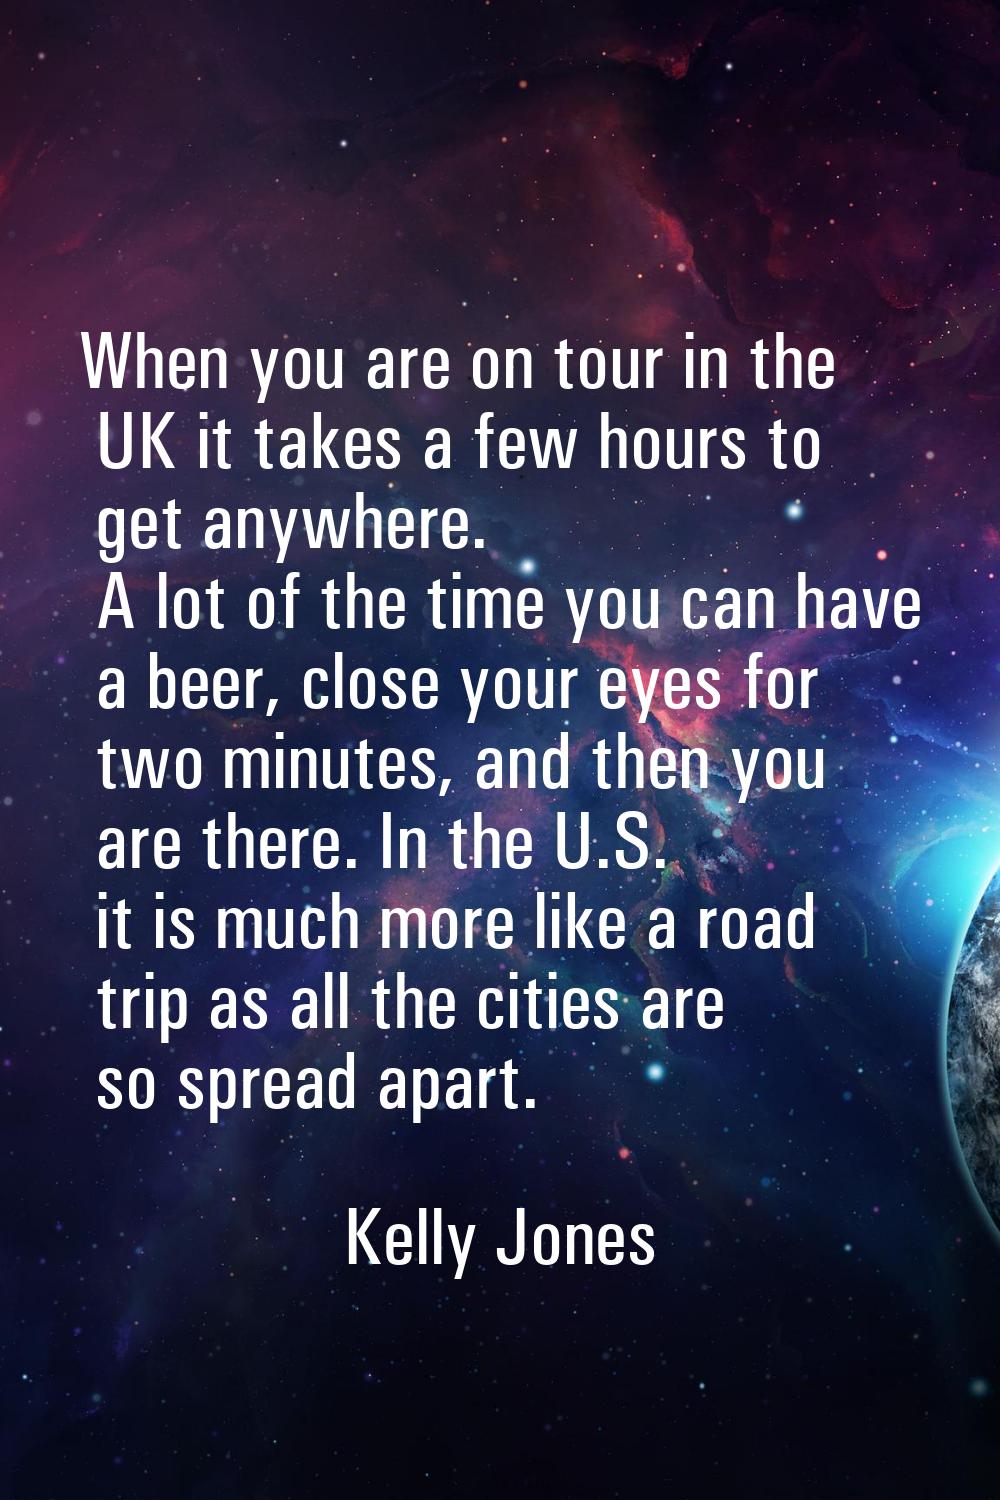 When you are on tour in the UK it takes a few hours to get anywhere. A lot of the time you can have